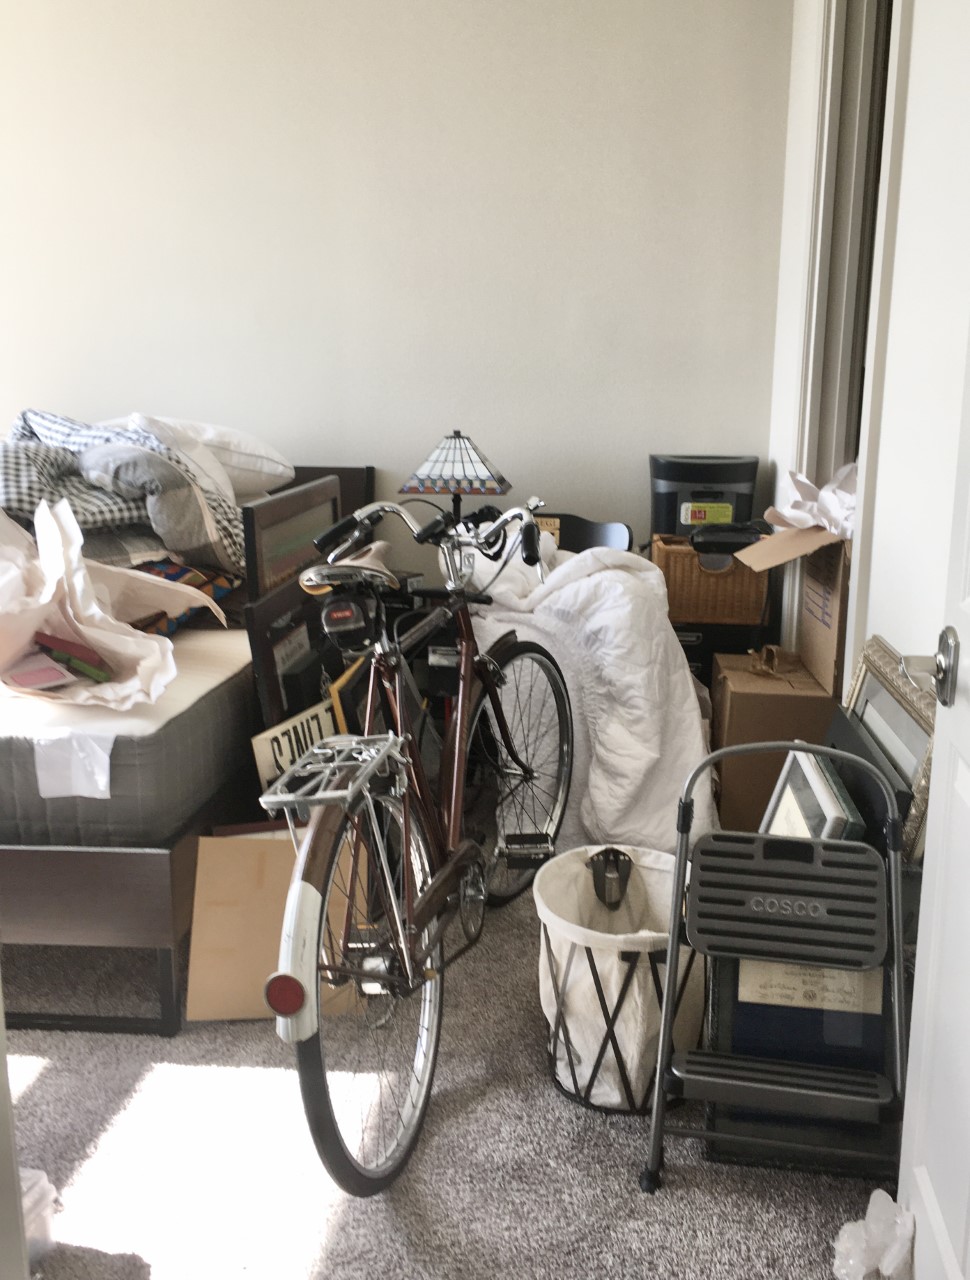 Tanglewood home organizing services - before unpack